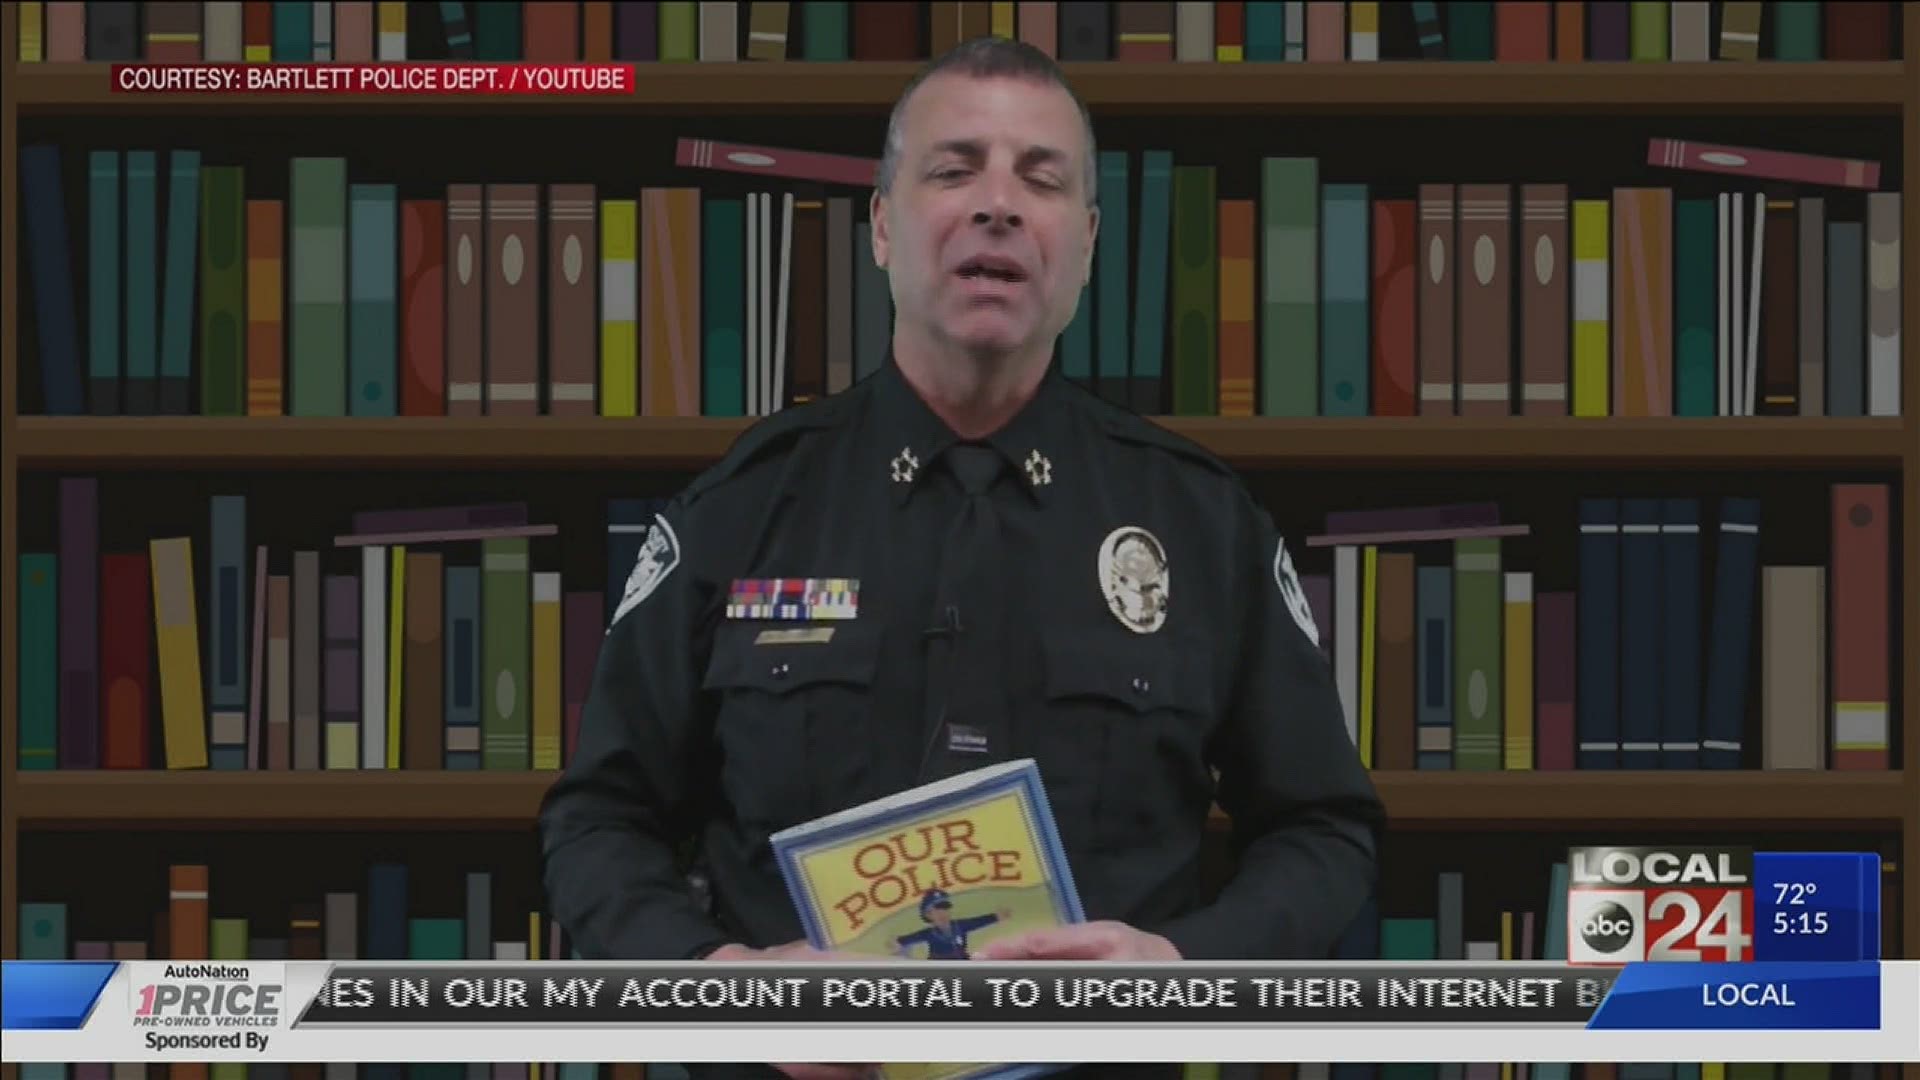 Officers are reading bedtime stories for kids through YouTube.